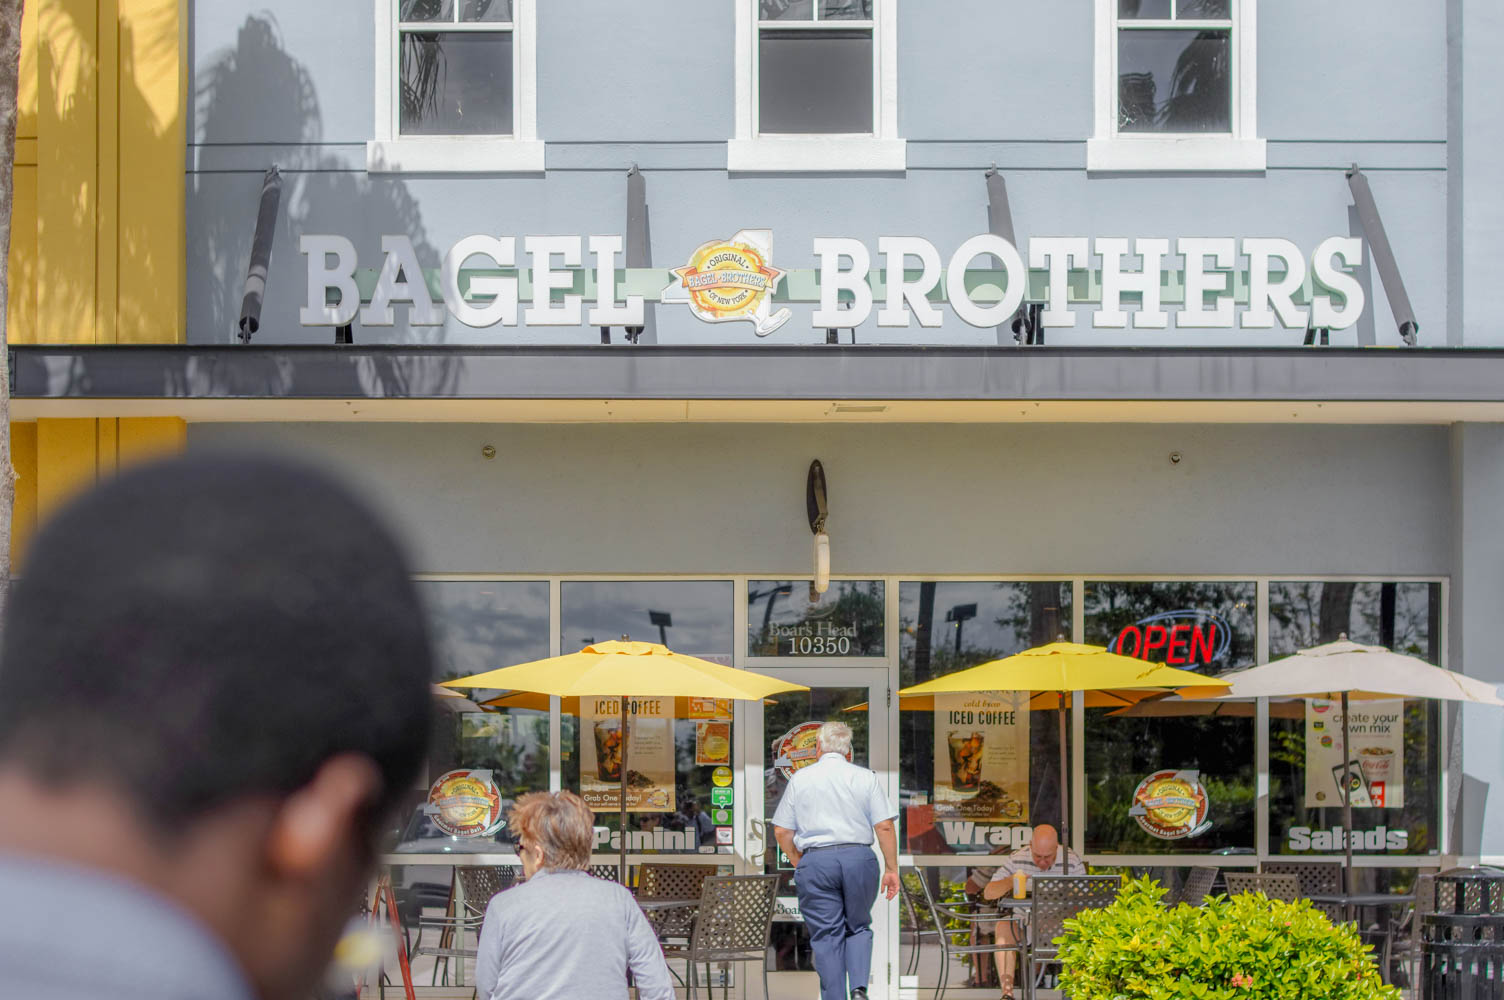 Bagel Brothers of New York